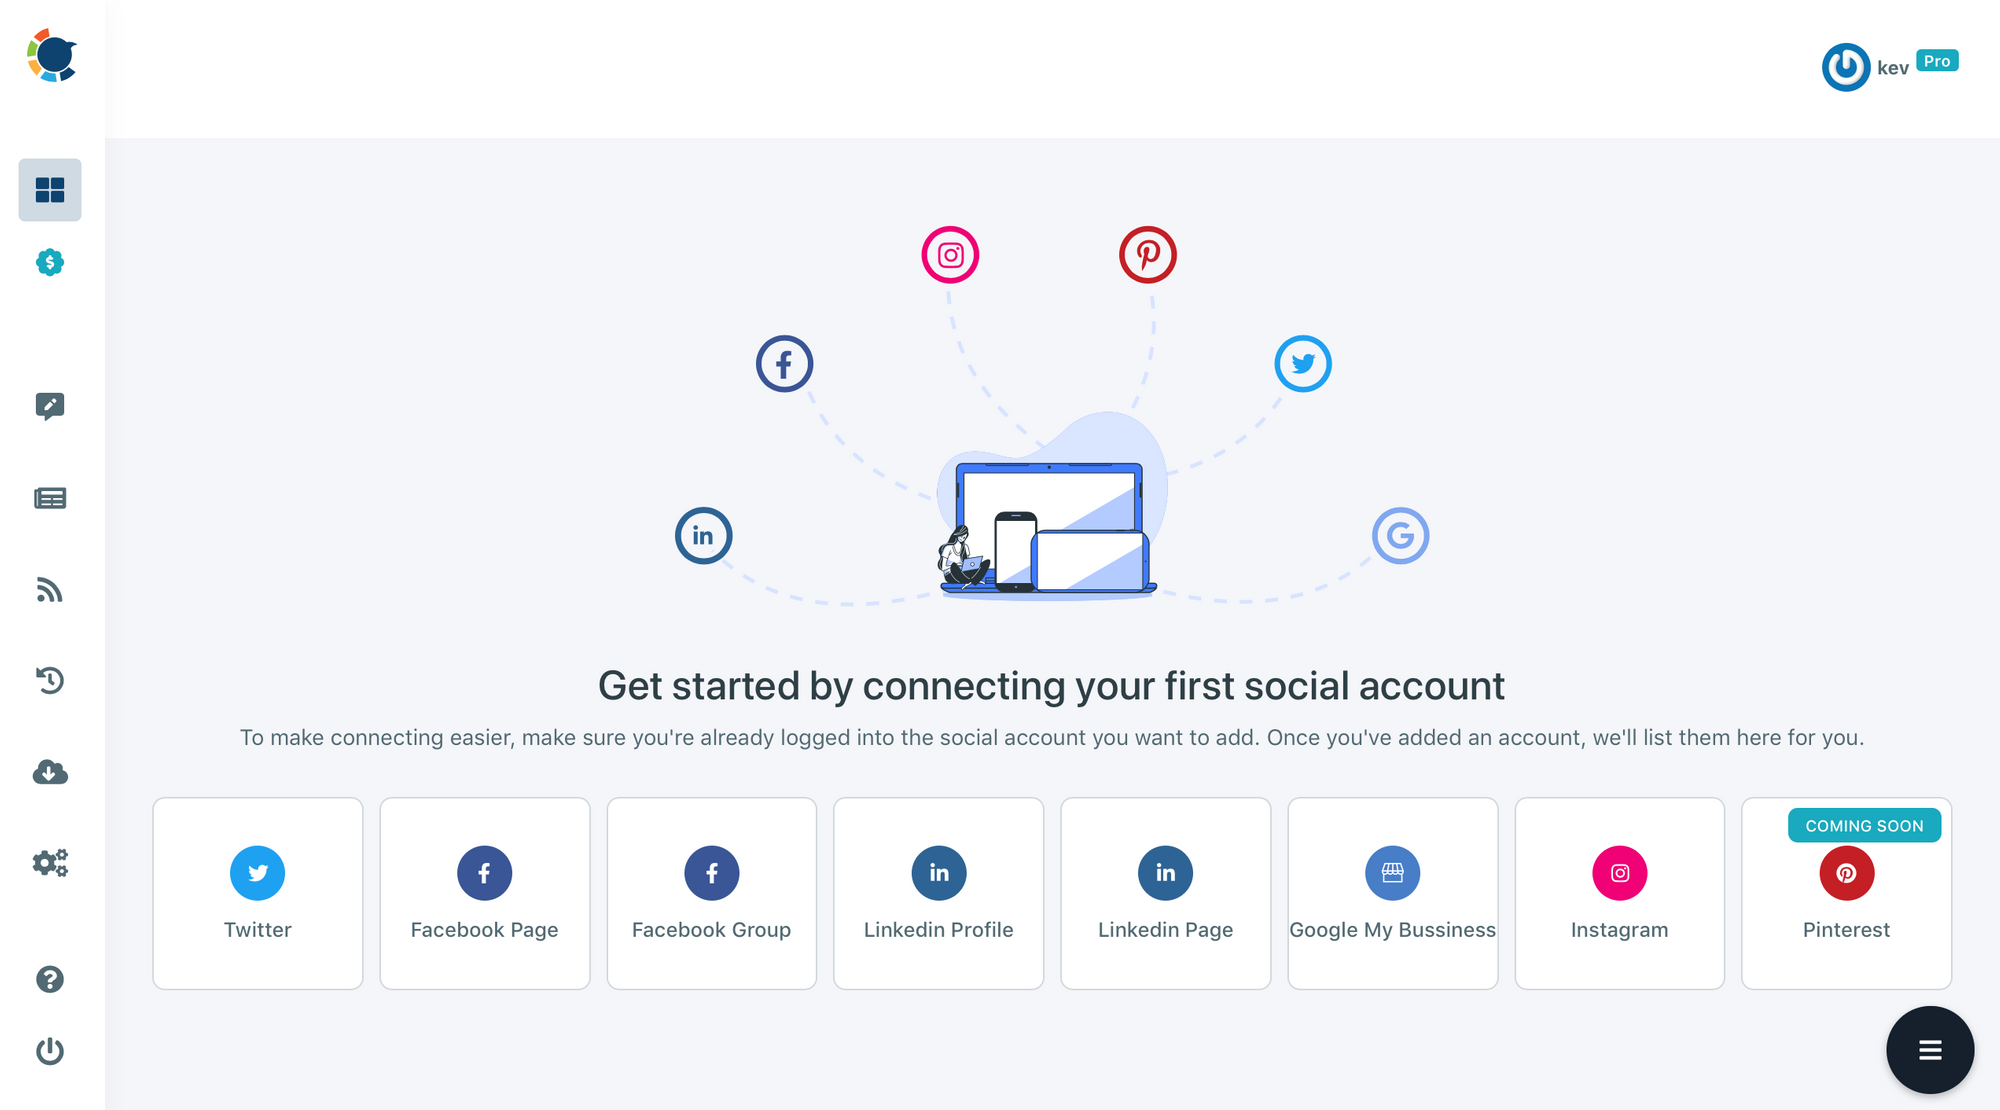 With Circleboom Publish tool, you can manage multiple social media accounts at one single dashboard!